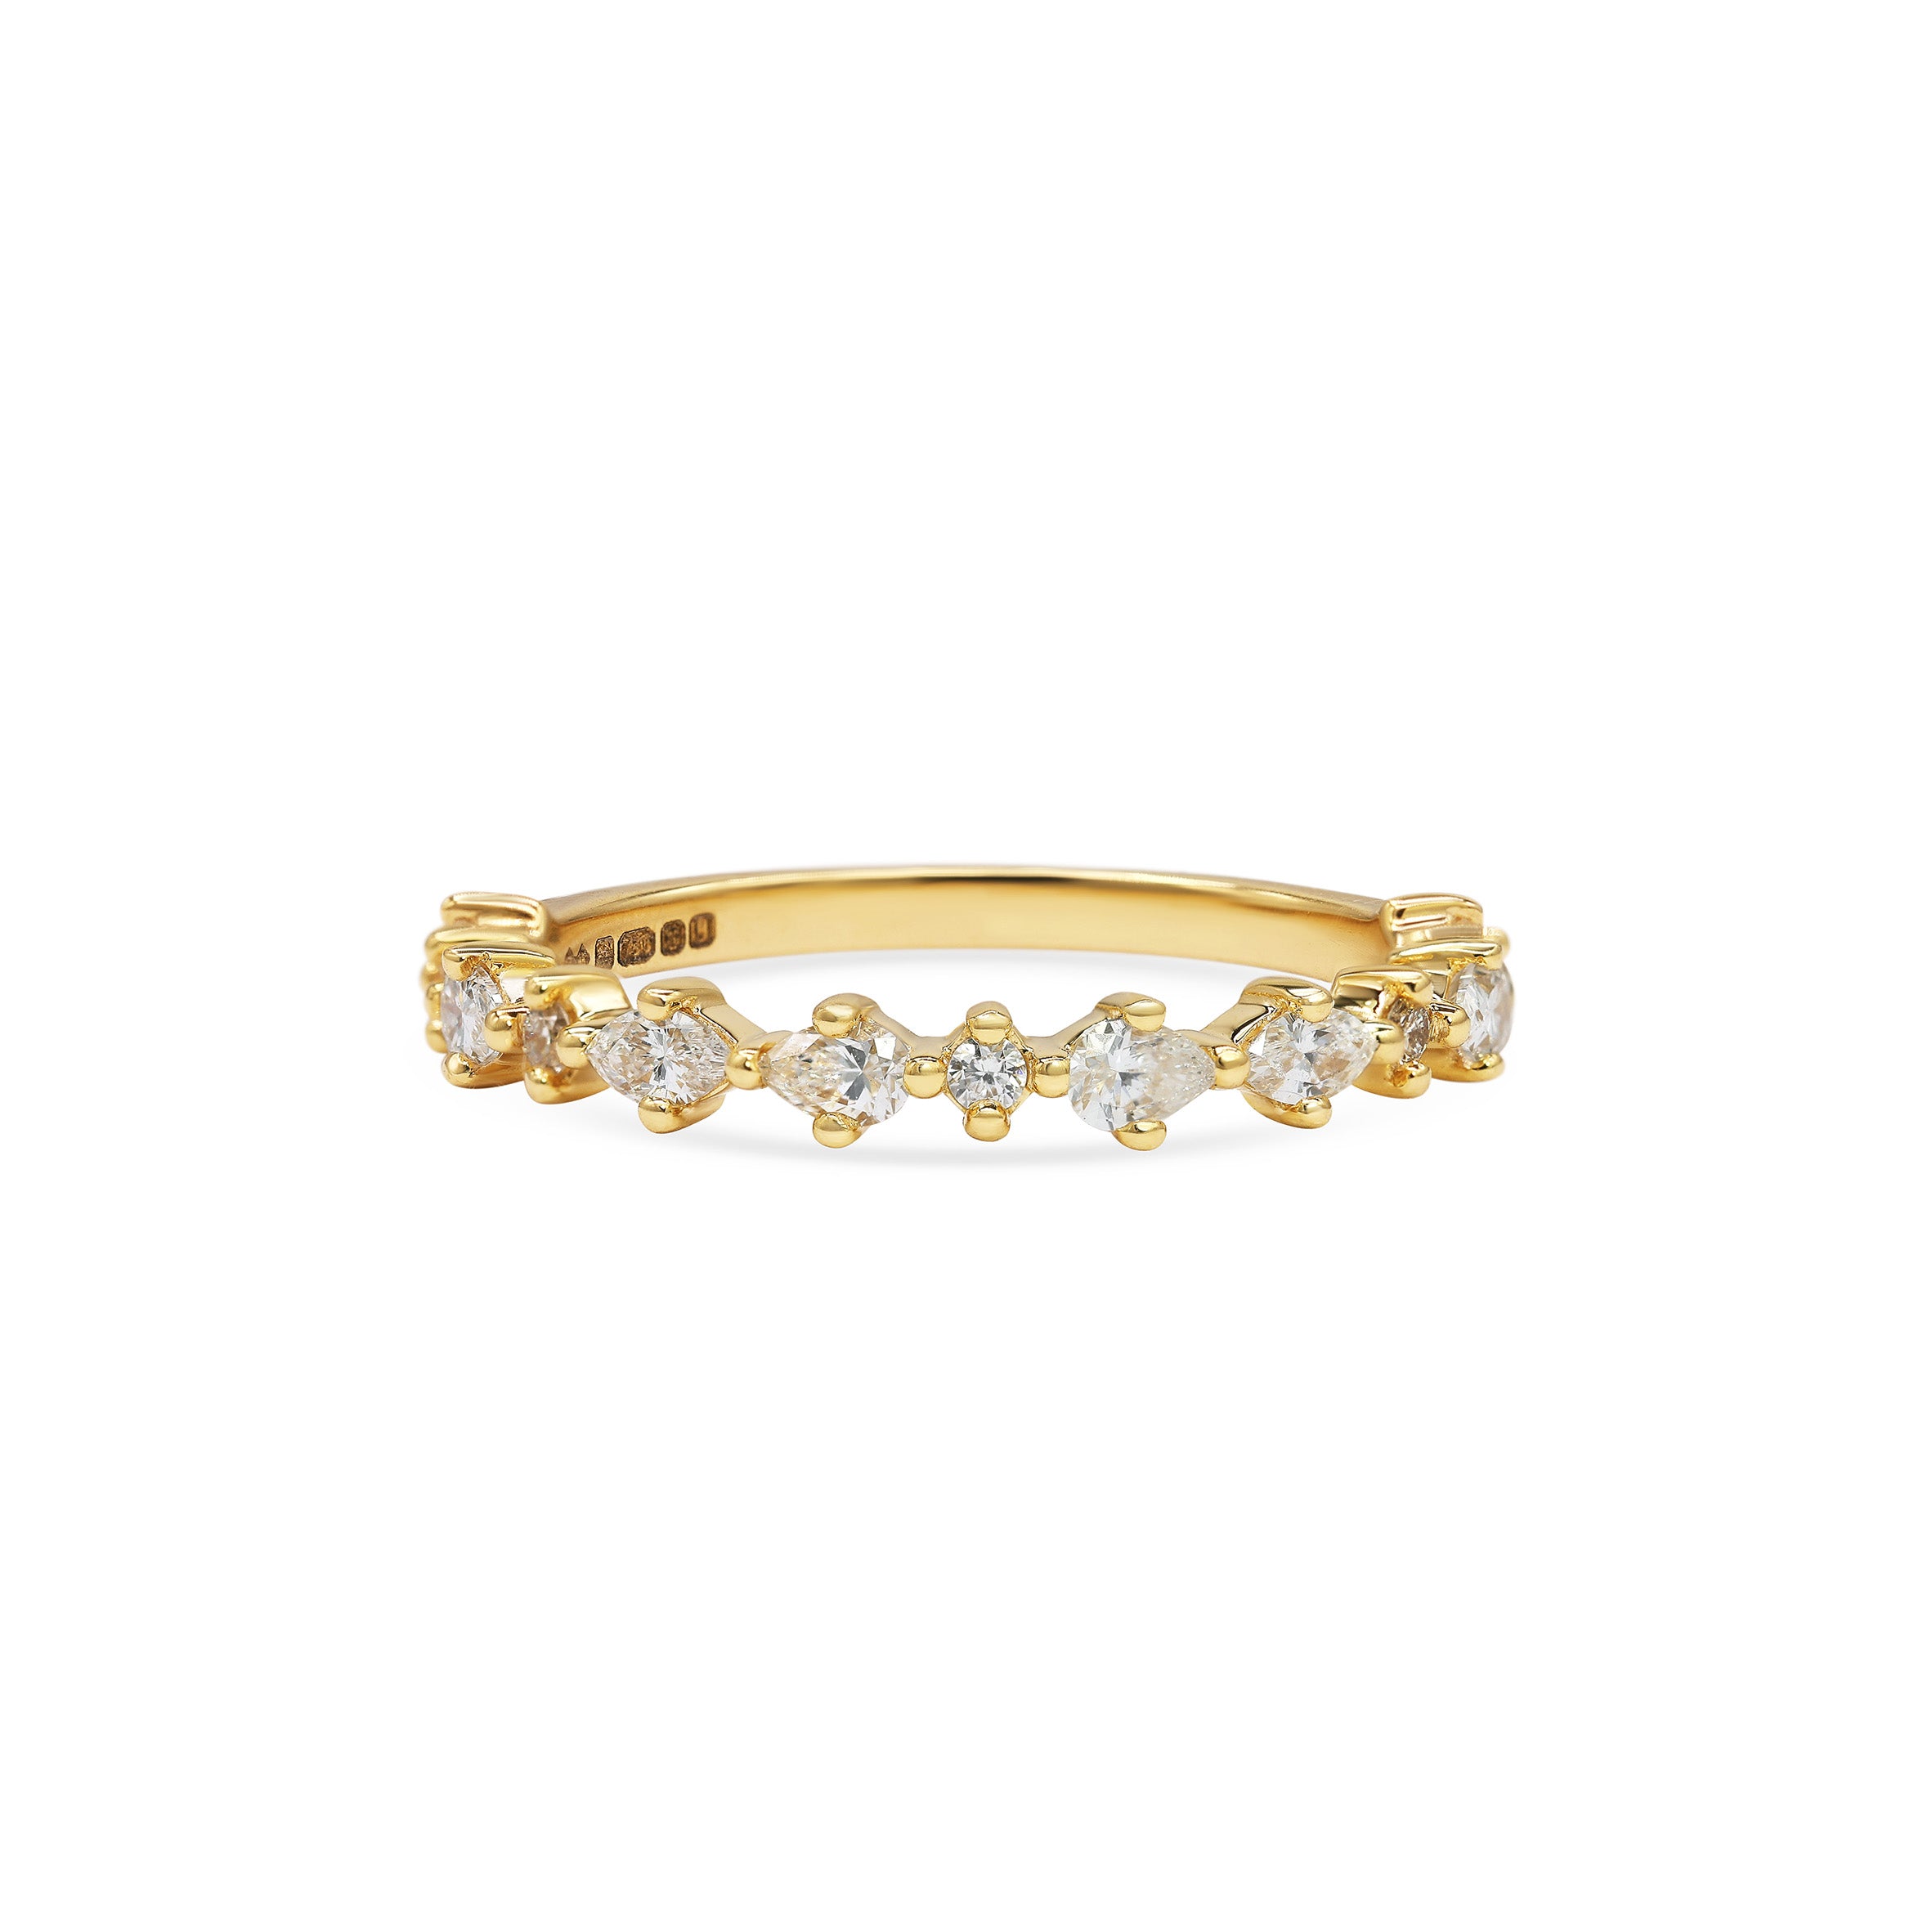 The Mixed Diamond Wedding Band by East London jeweller Rachel Boston | Discover our collections of unique and timeless engagement rings, wedding rings, and modern fine jewellery.